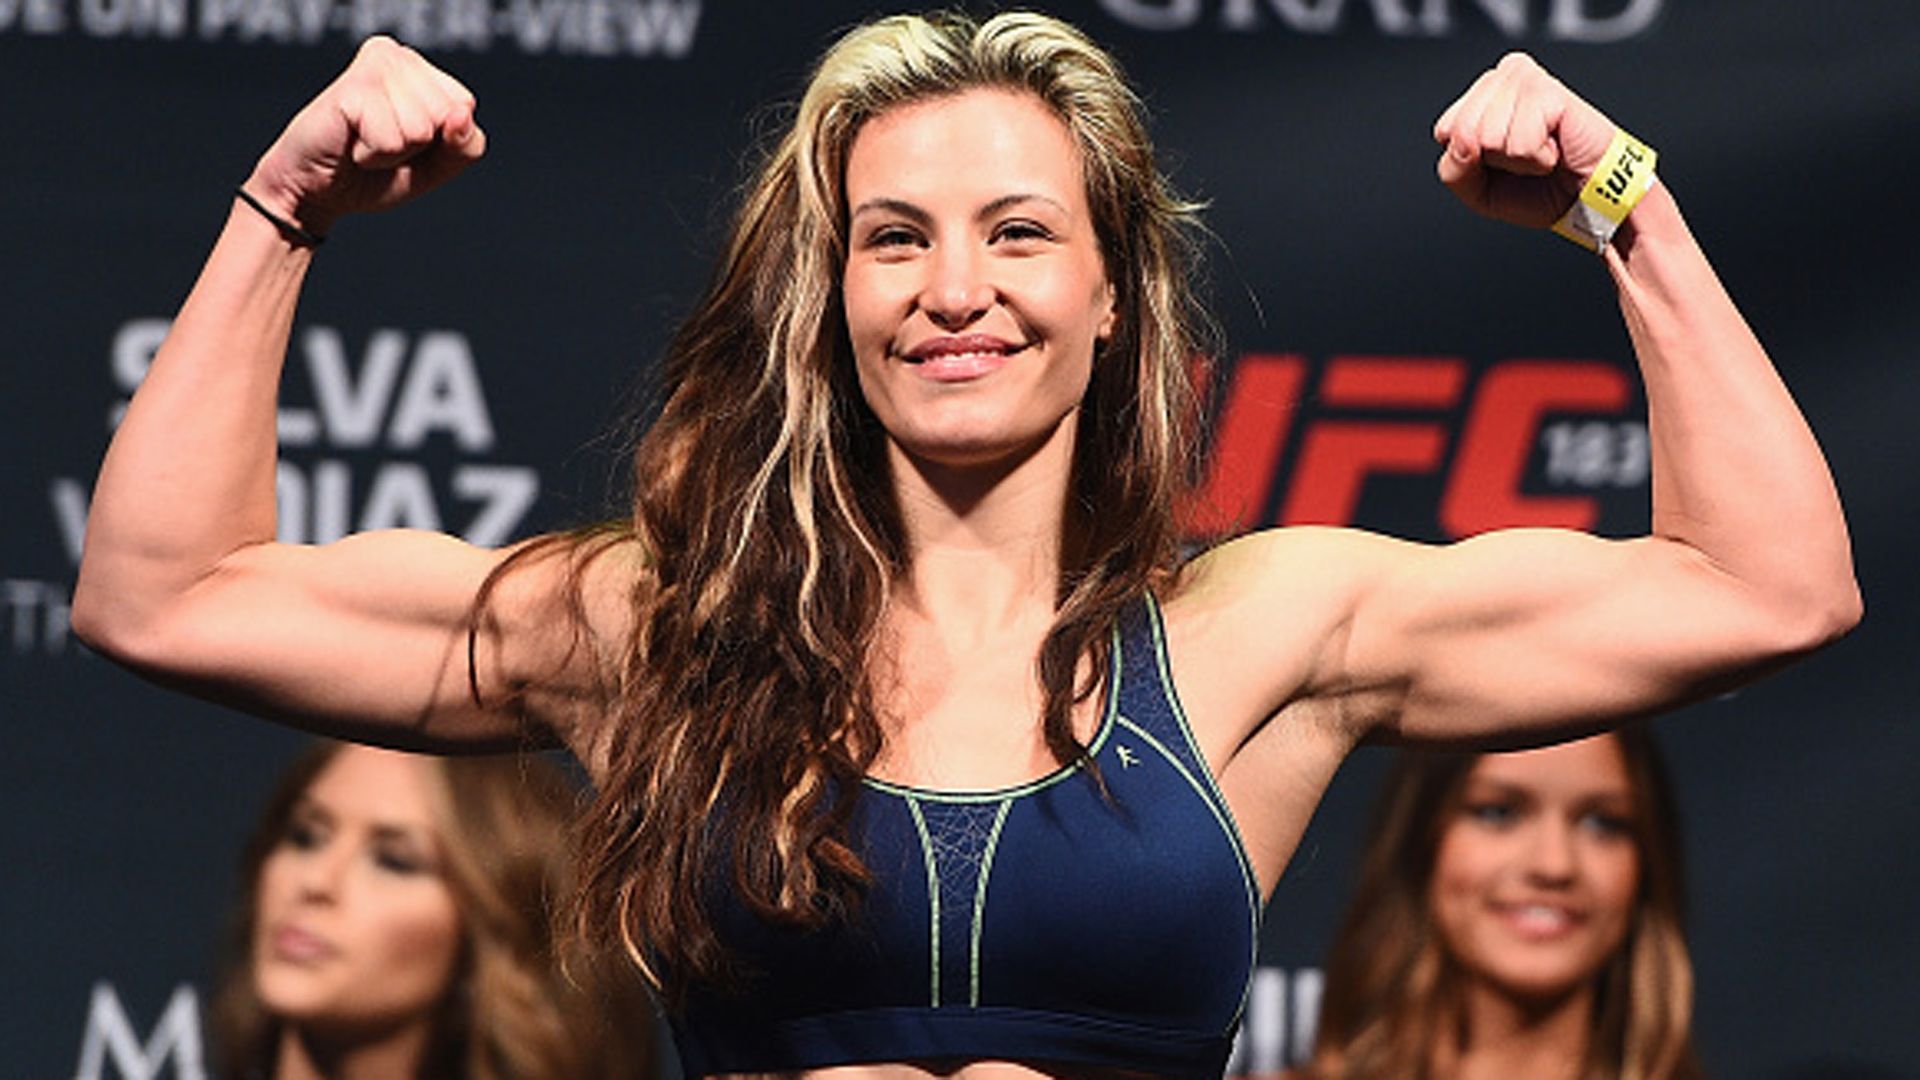 UFC on Fox 16's Miesha Tate: To get Ronda Rousey, get past me